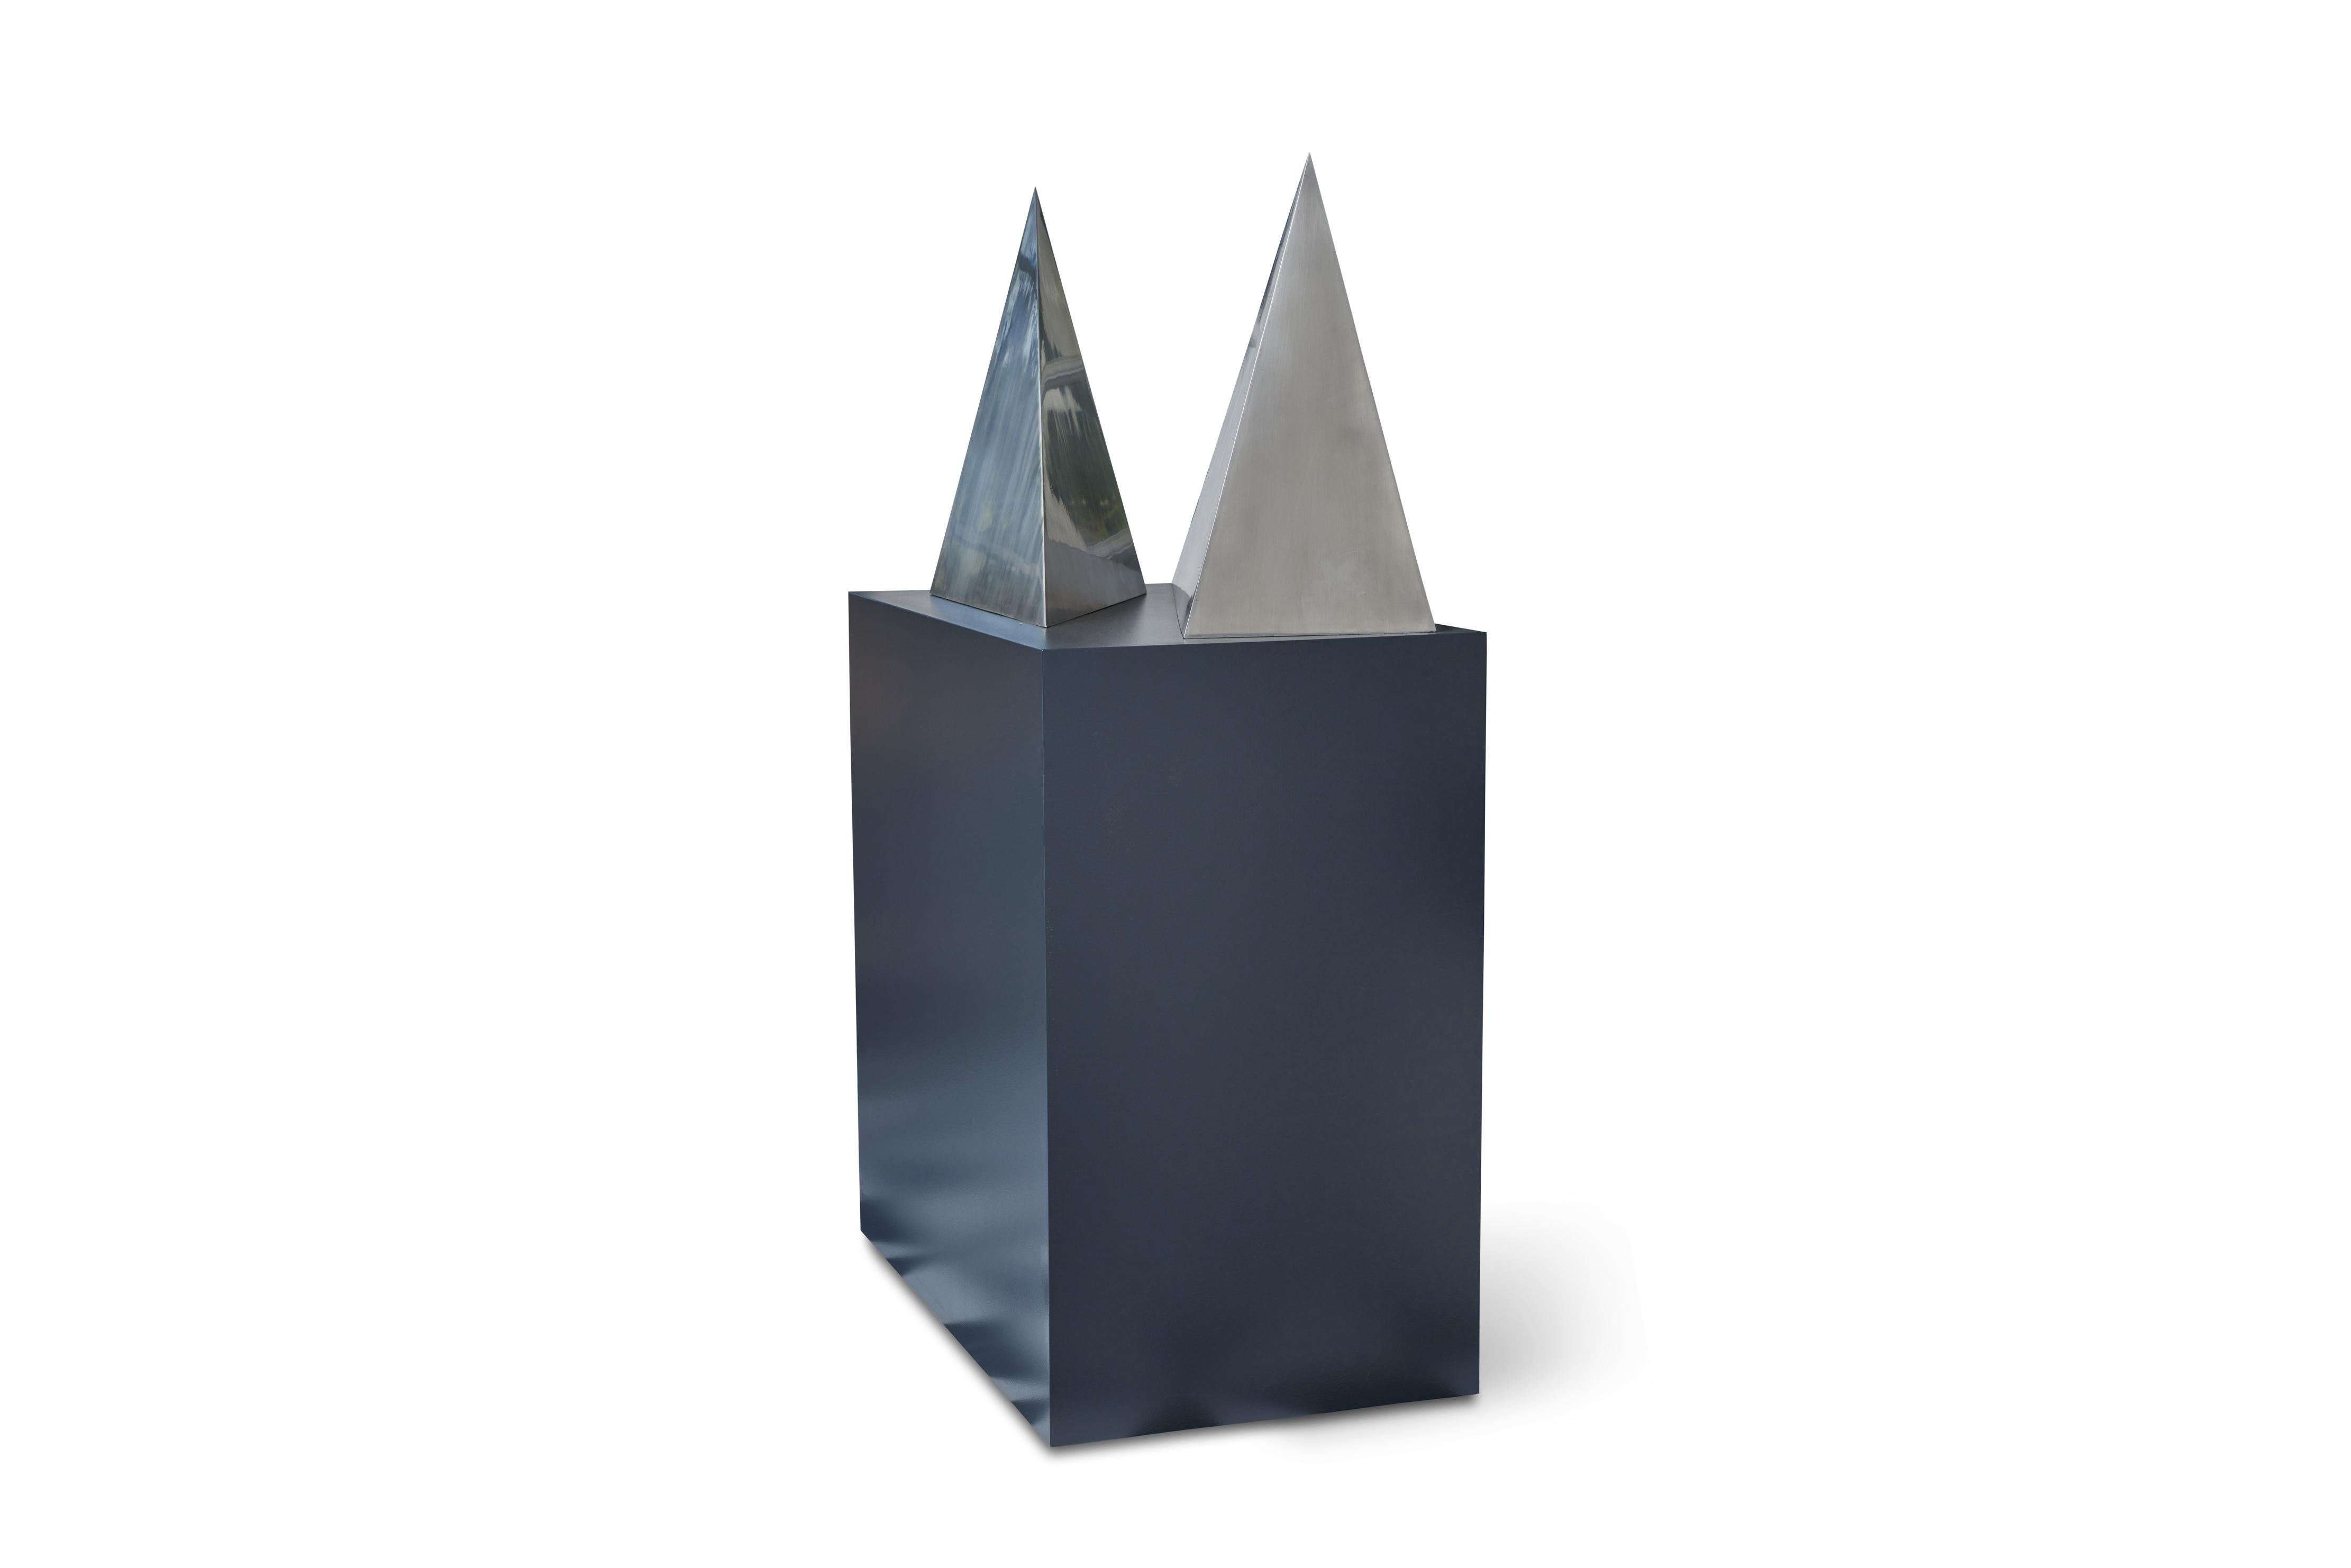 Late 20th Century Geometric Polished Stainless Steel Sculptures by Rafe Affleck, circa 1970's For Sale